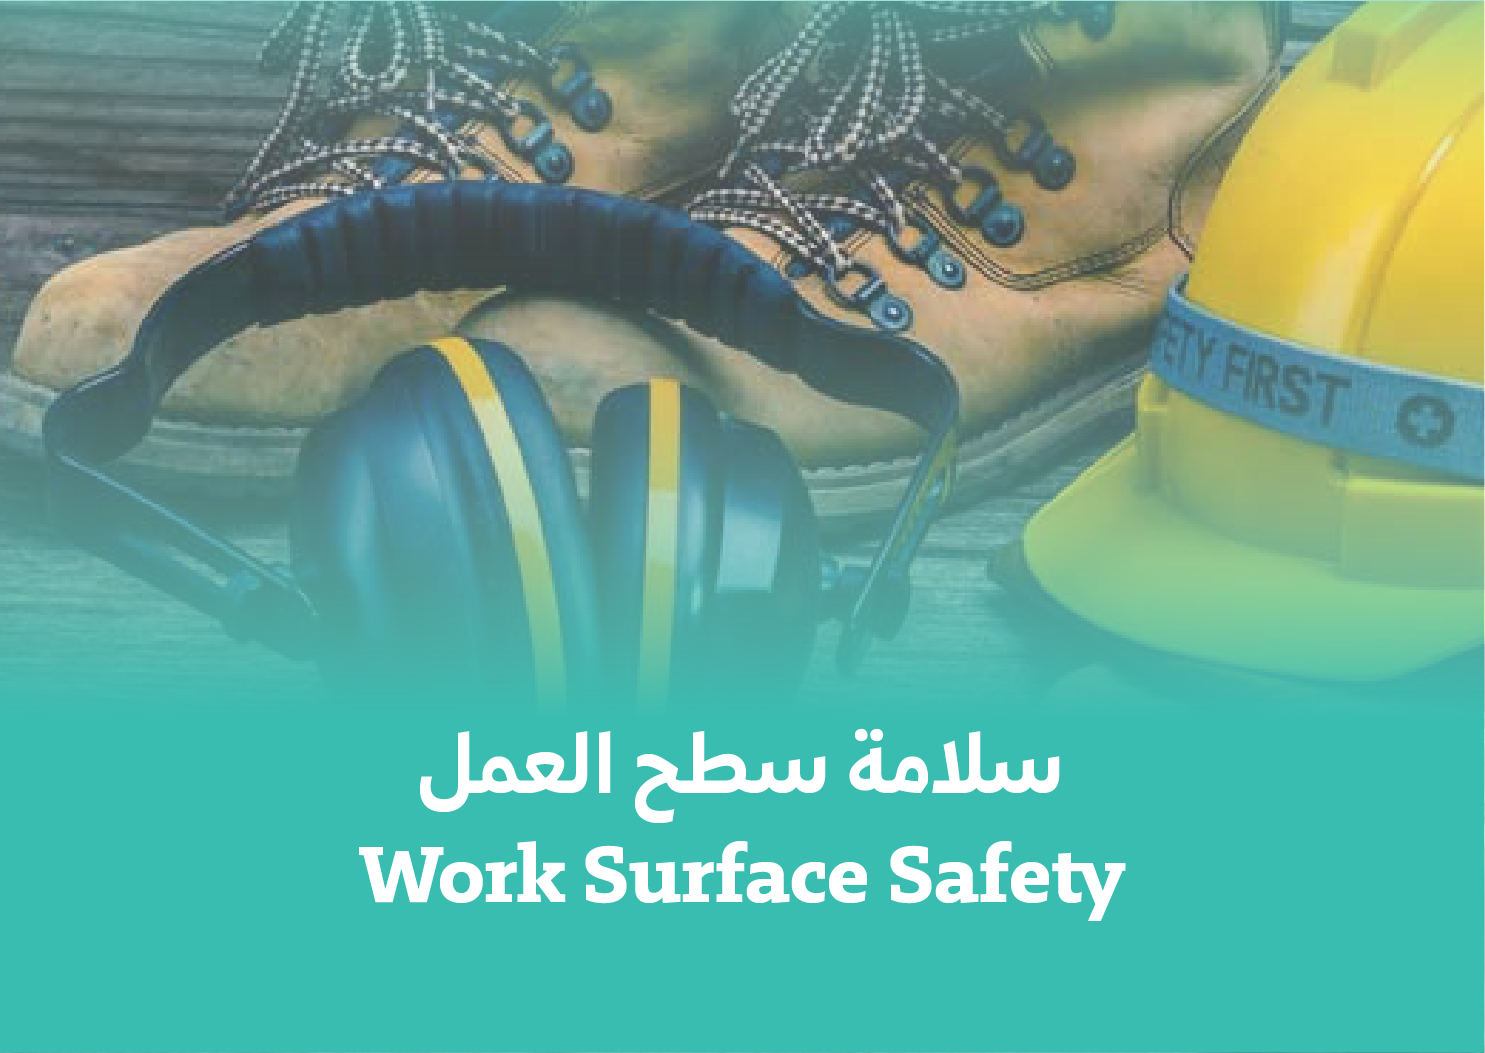 Work Surface Safety